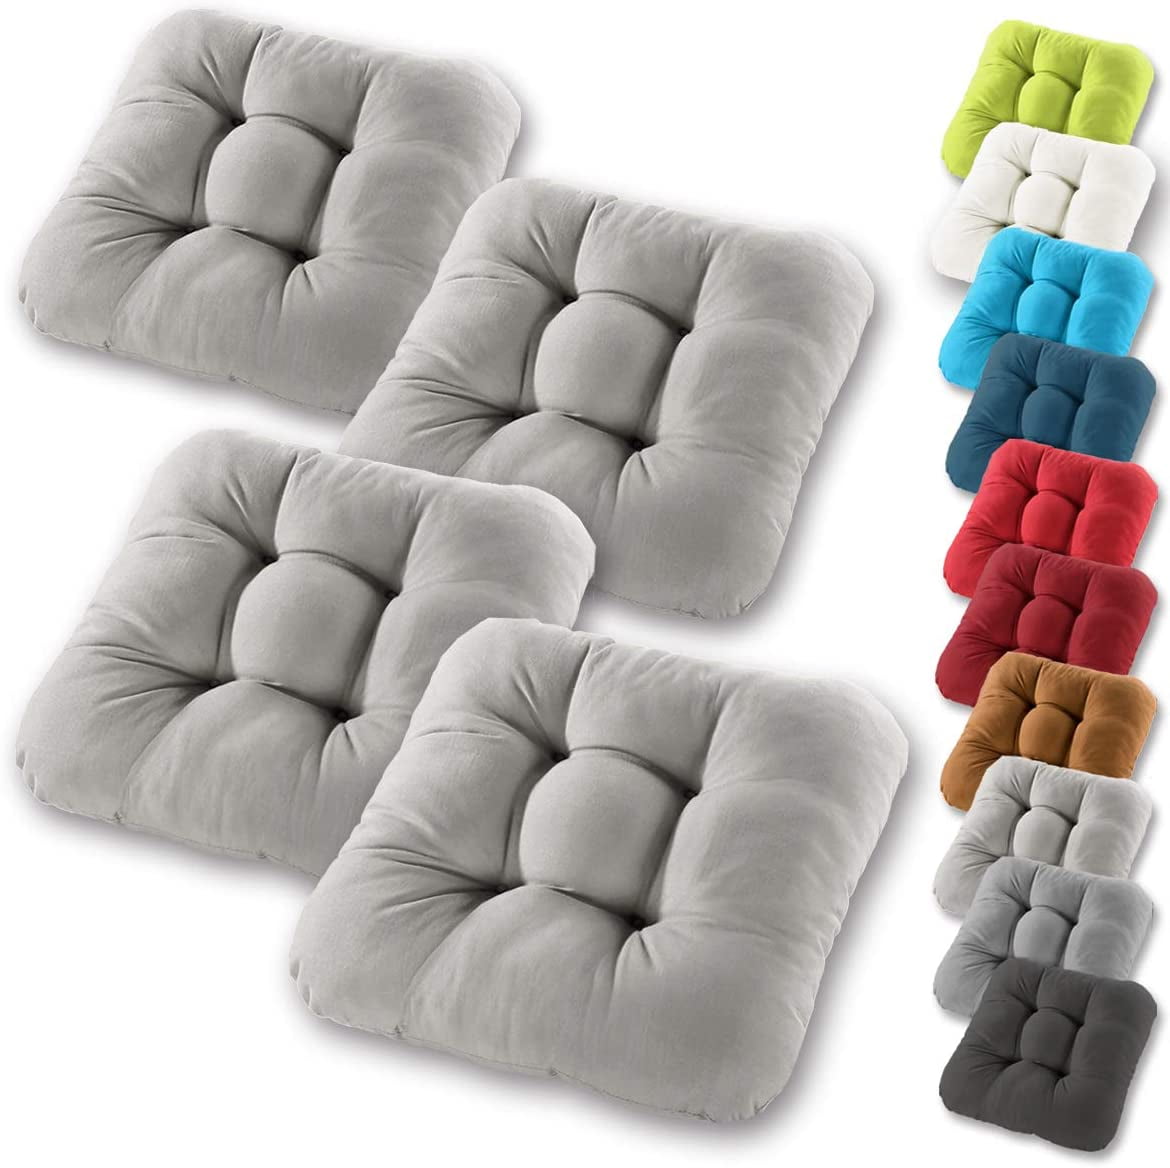 Suitable for indoor and outdoor use, with thick bedding four-hole